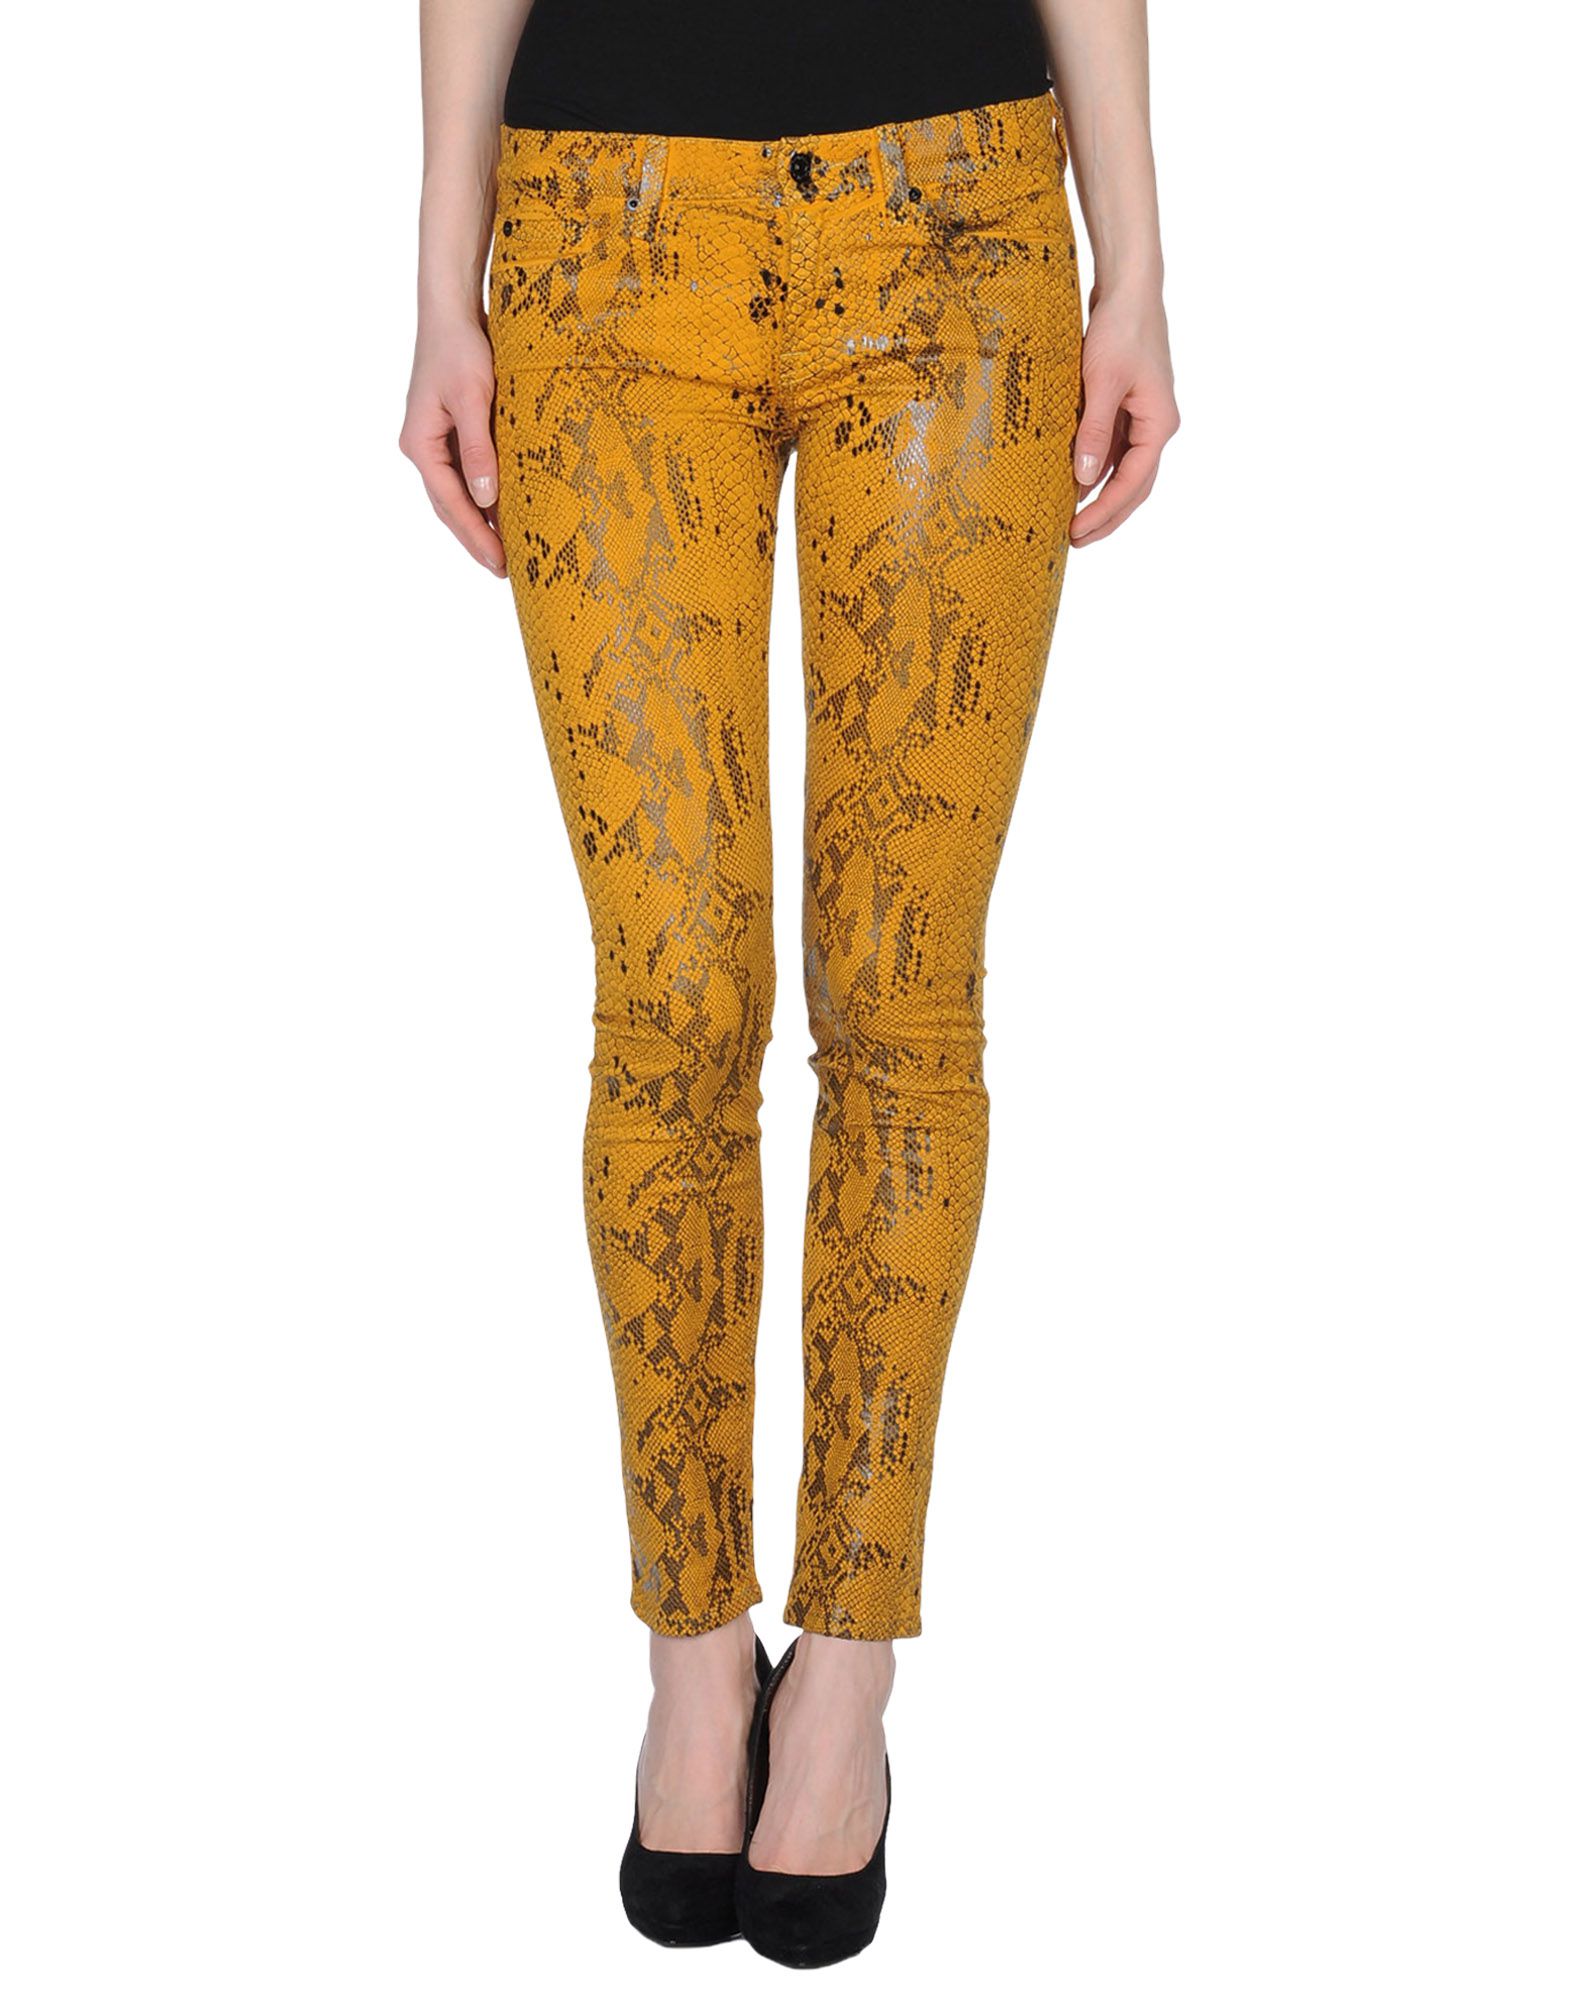 Foto 7 For All Mankind Pantalones Mujer Ocre